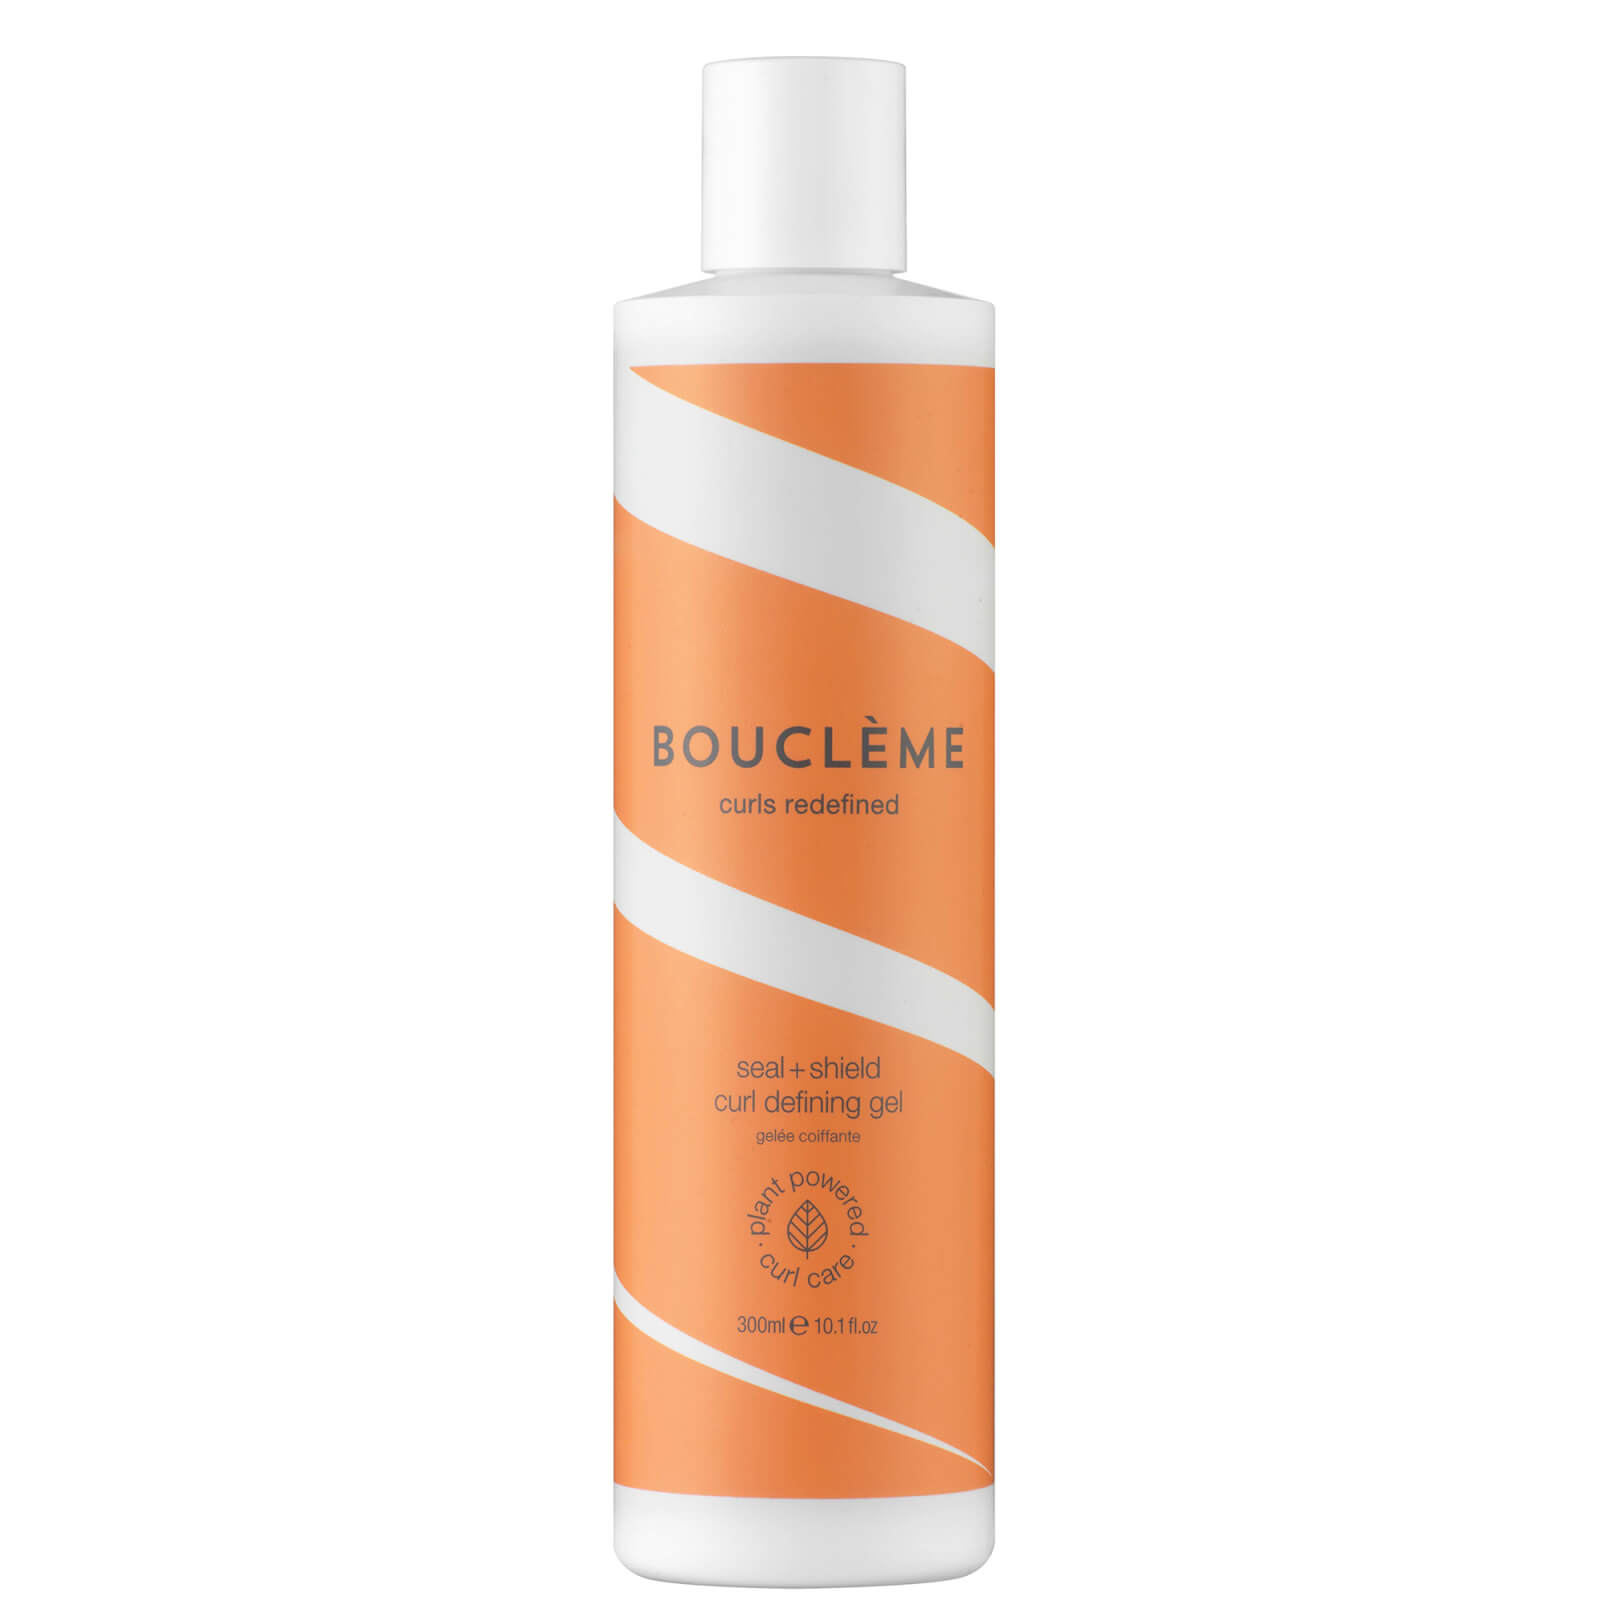 Image of Bouclème Seal and Shield Styling Gel 300ml